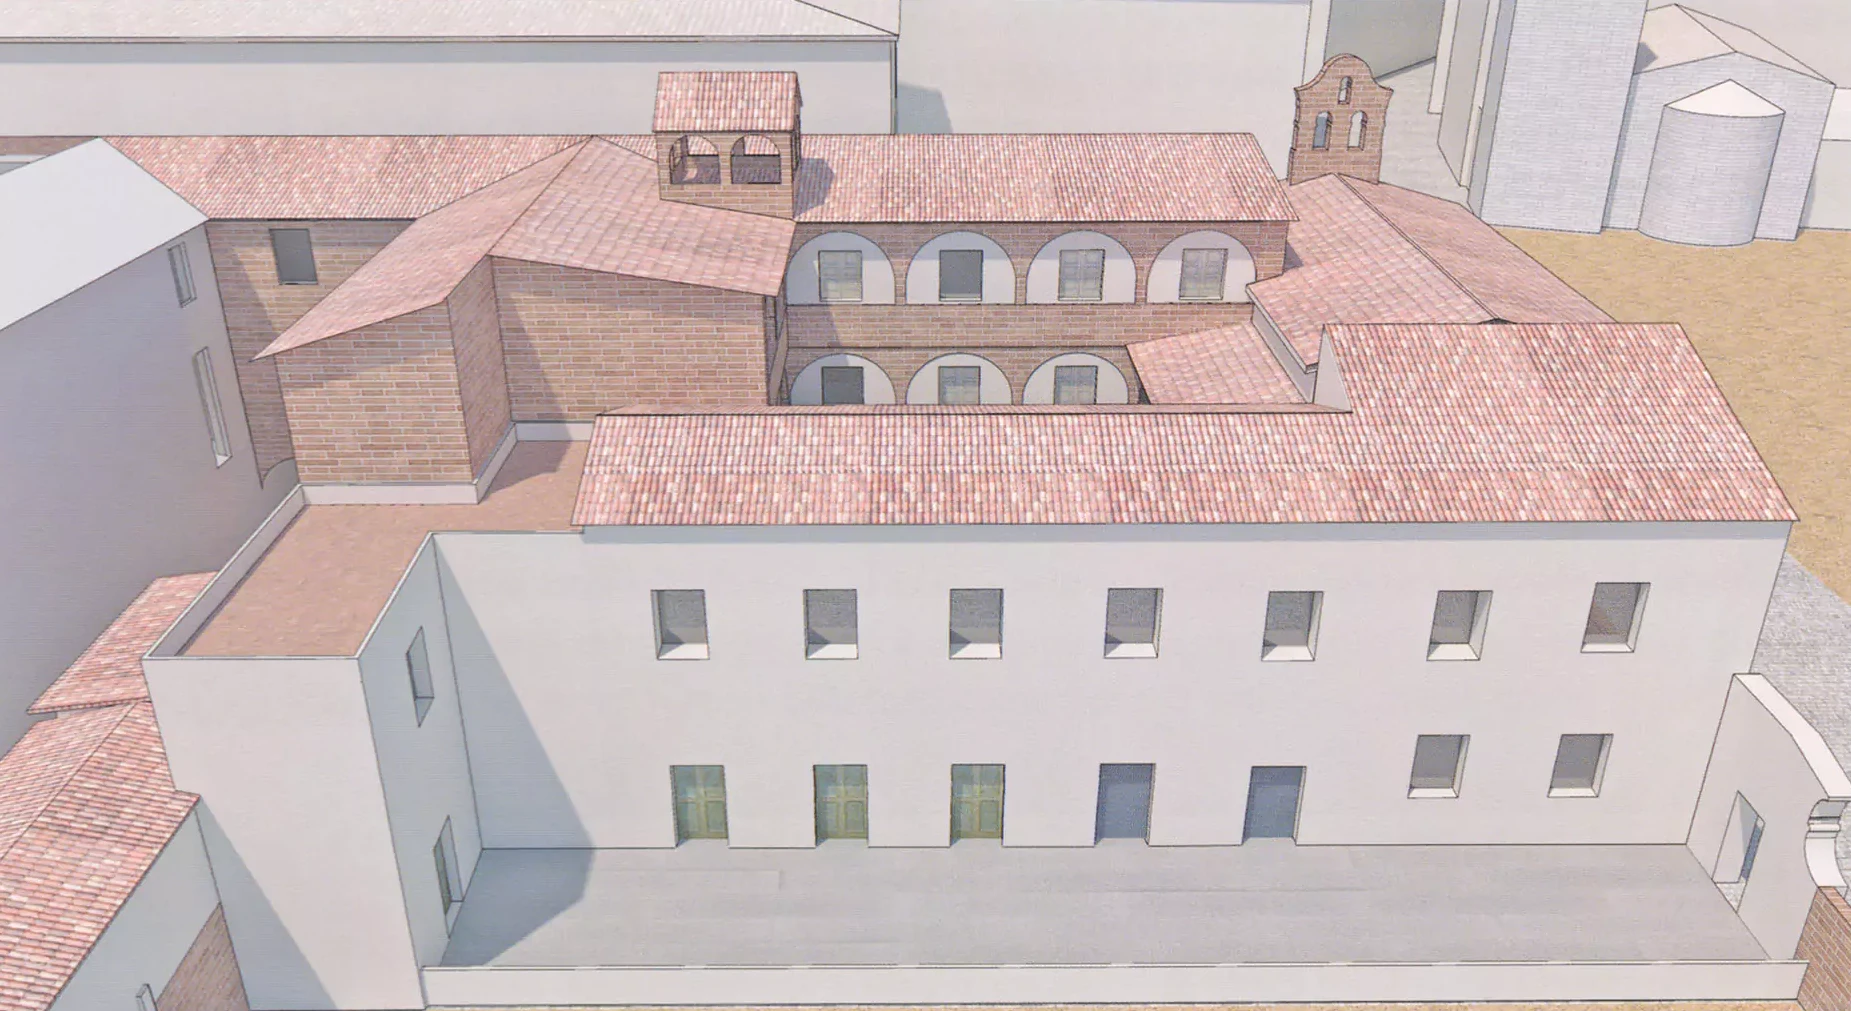 Study and three dimensional reconstruction of the building's historical phases: Around 1930